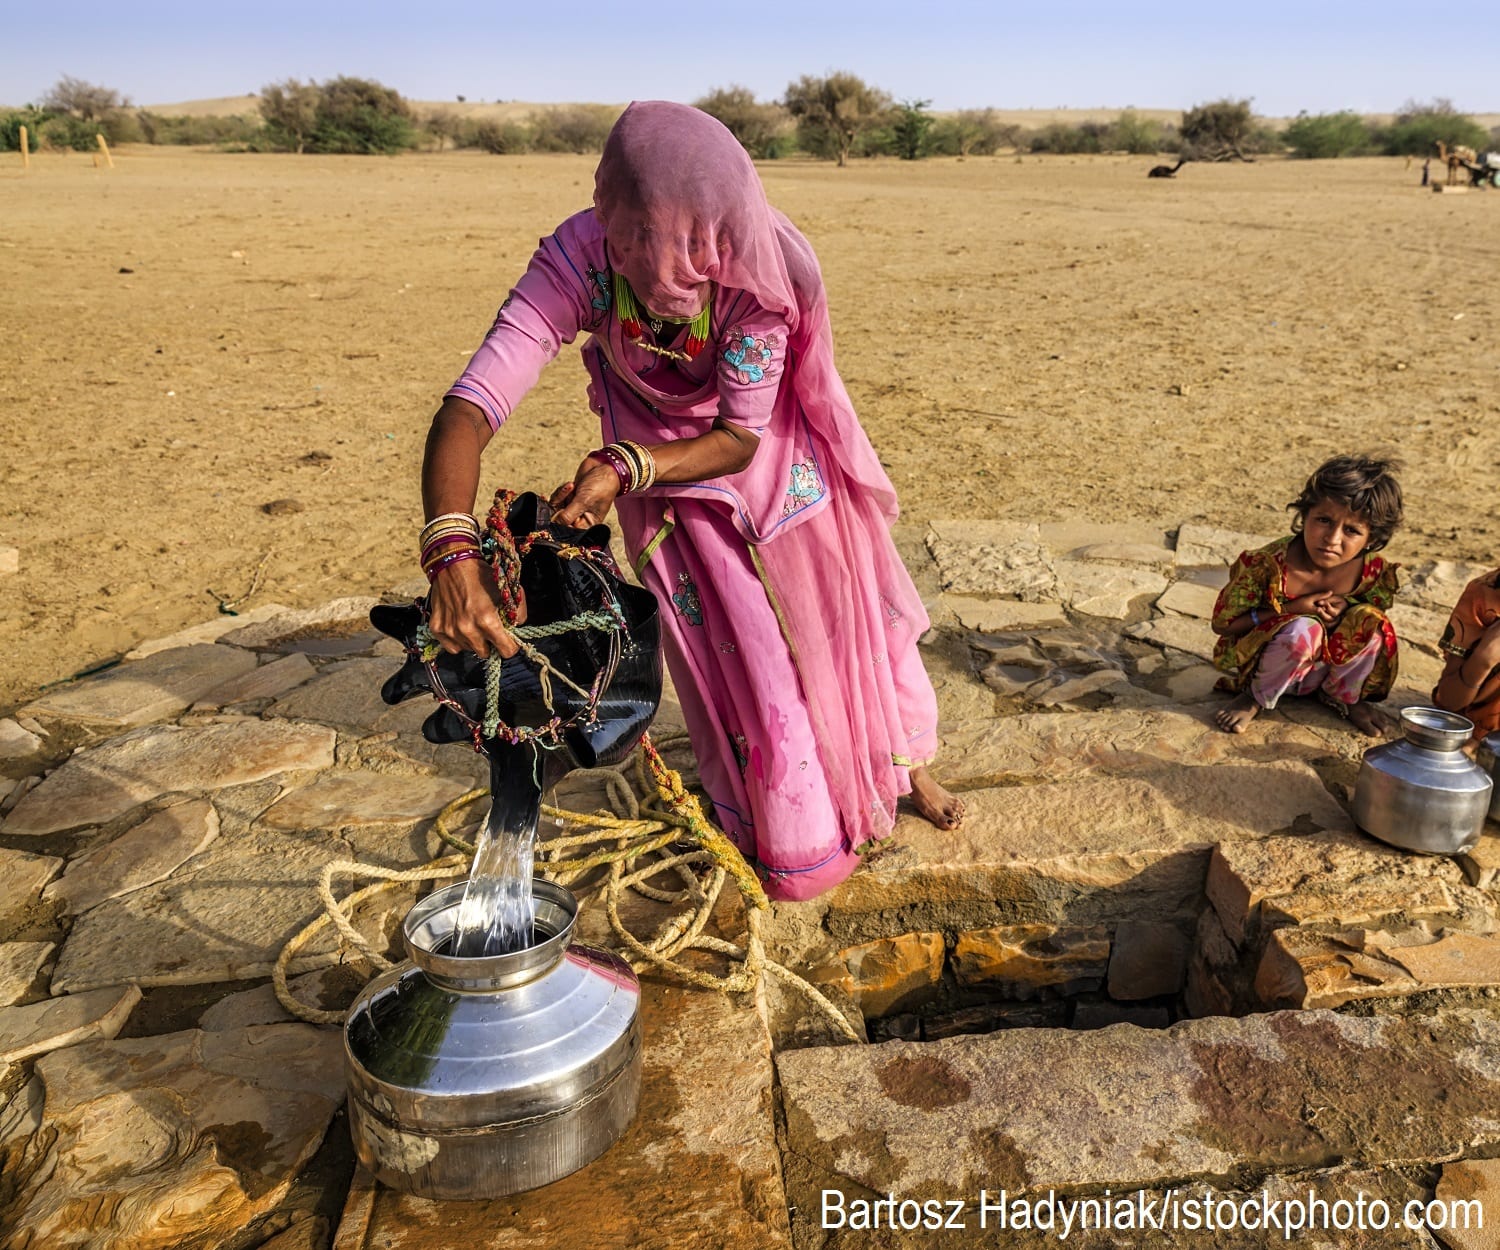 An Indian woman drawing water from a well while her children wait beside her.